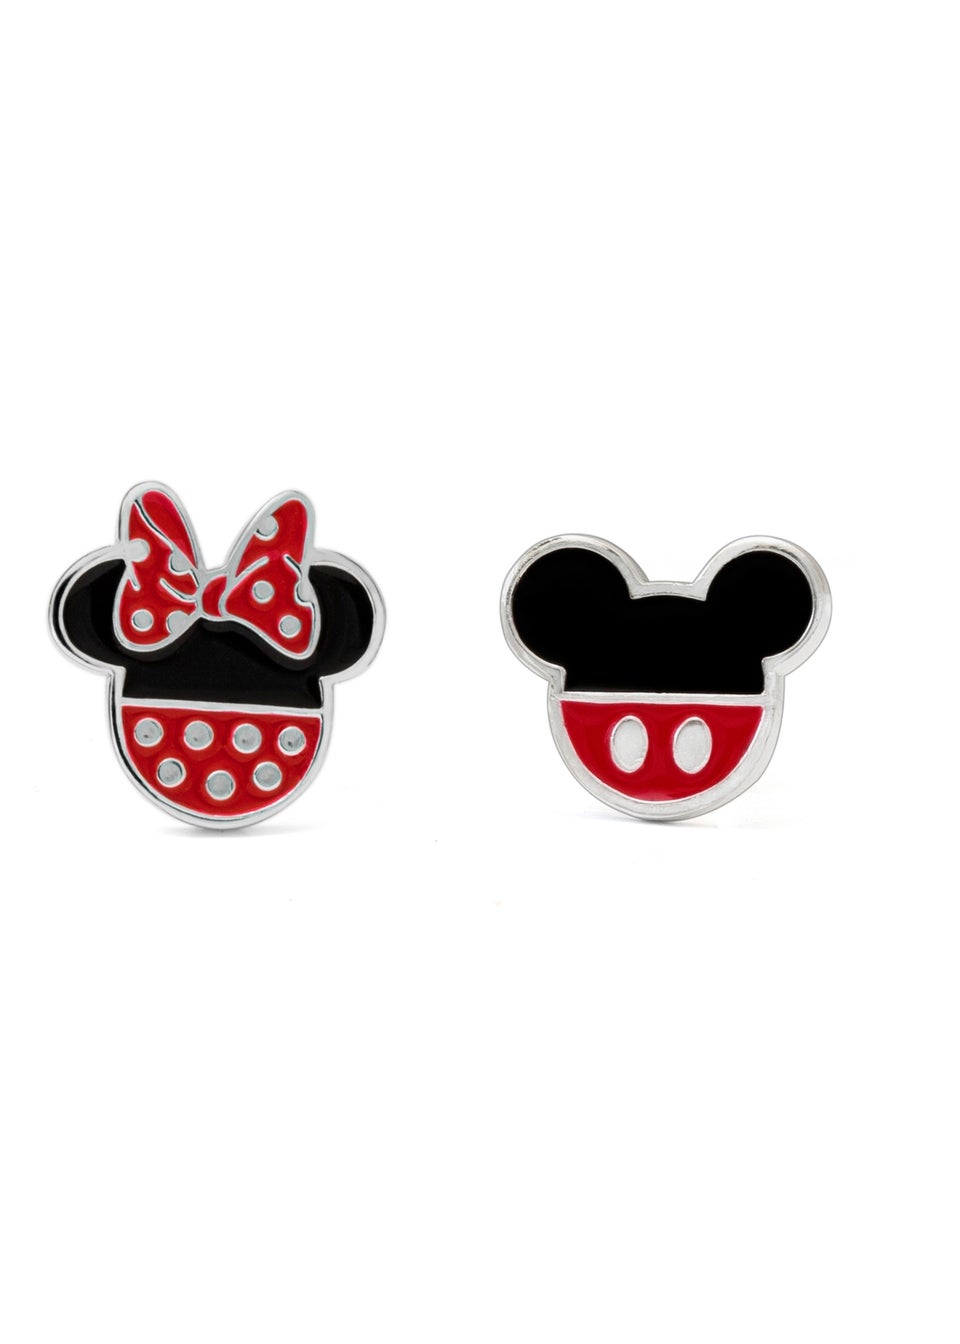 Disney Mickey and Minnie Mouse Enamel Filled Earrings